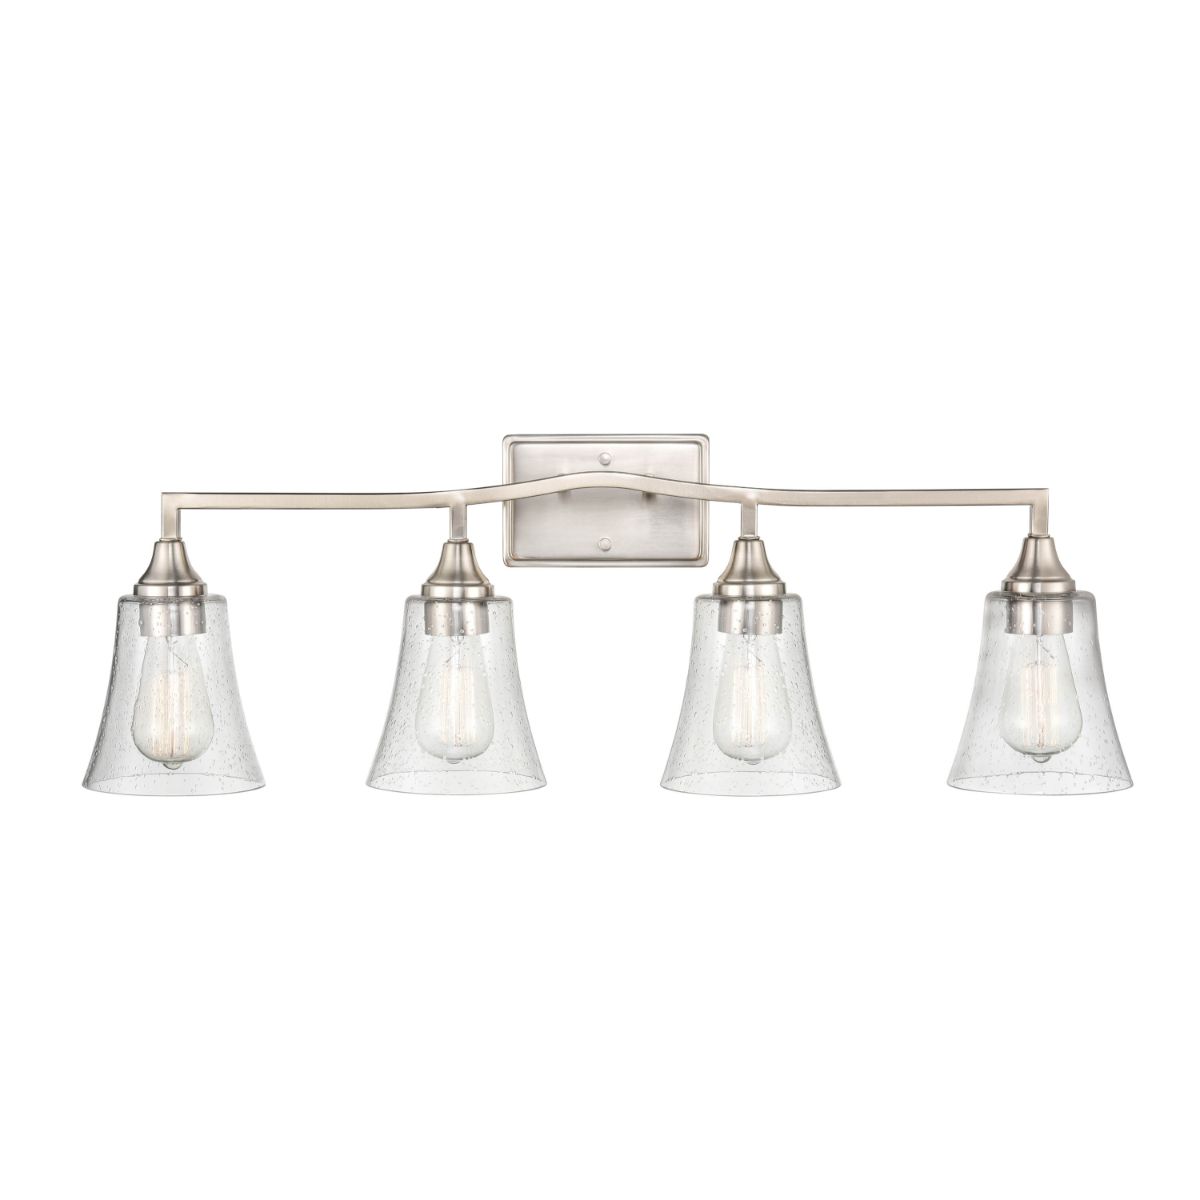 Caily 33 in 4 Lights Vanity Light - Bees Lighting